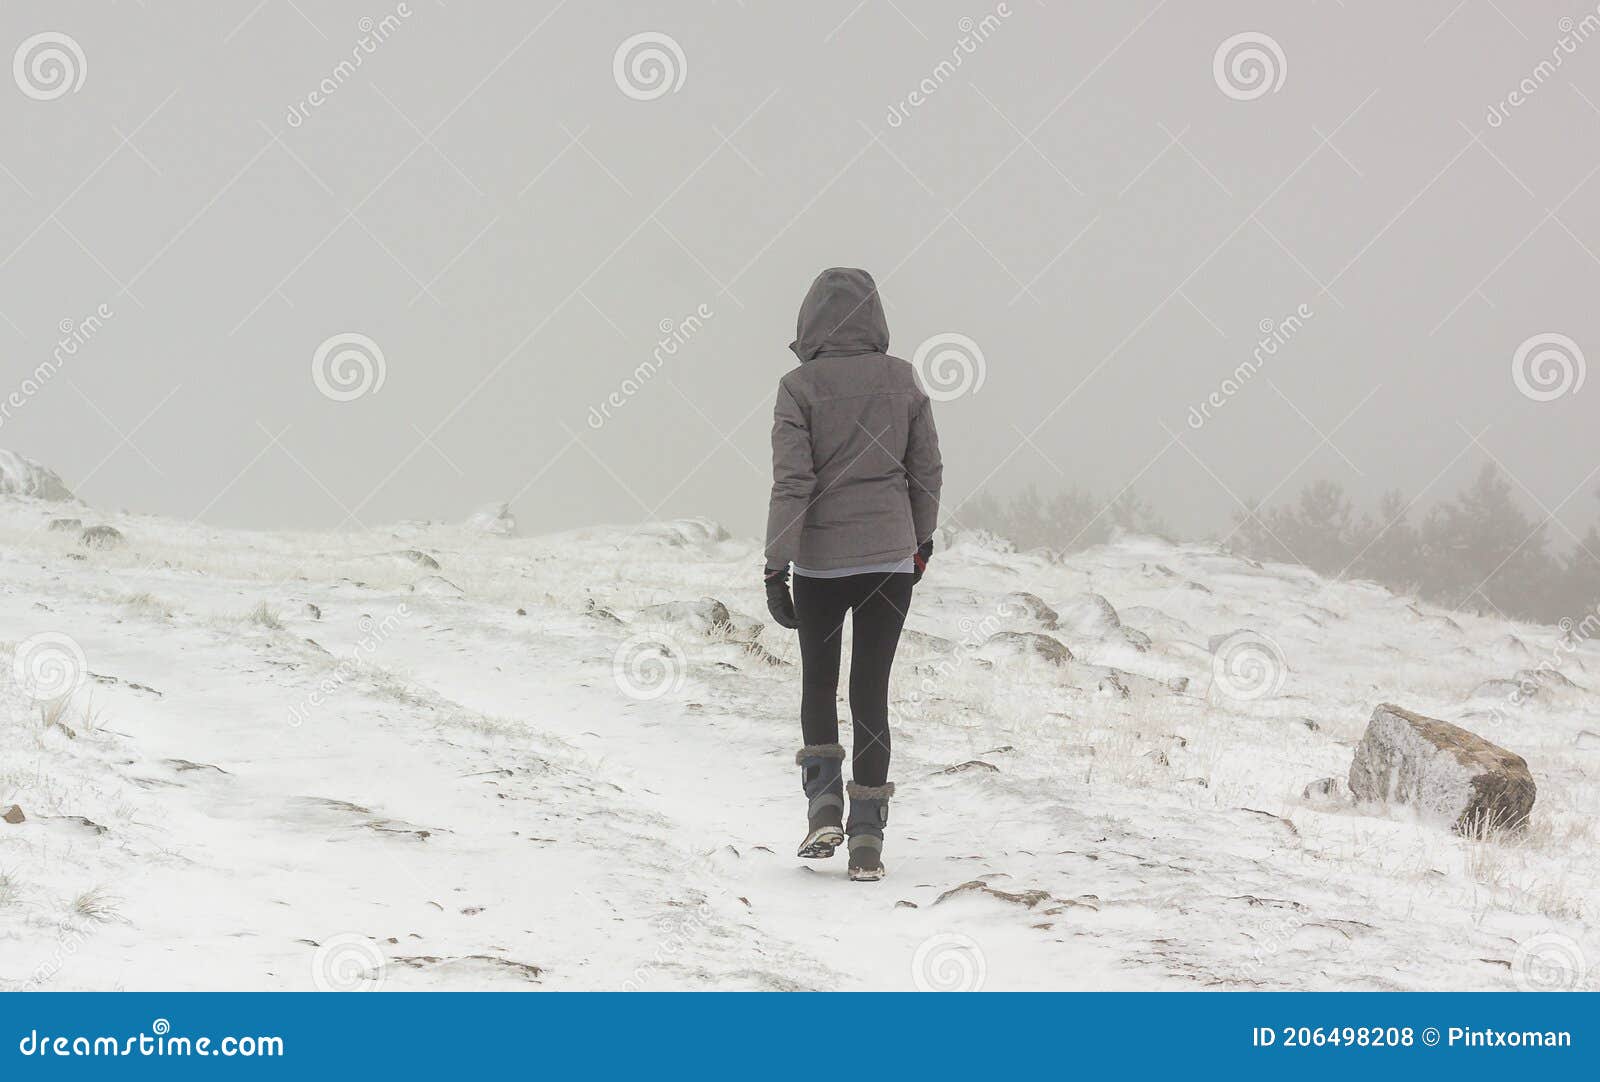 lonely woman walking in the snow. extreme weather in winter